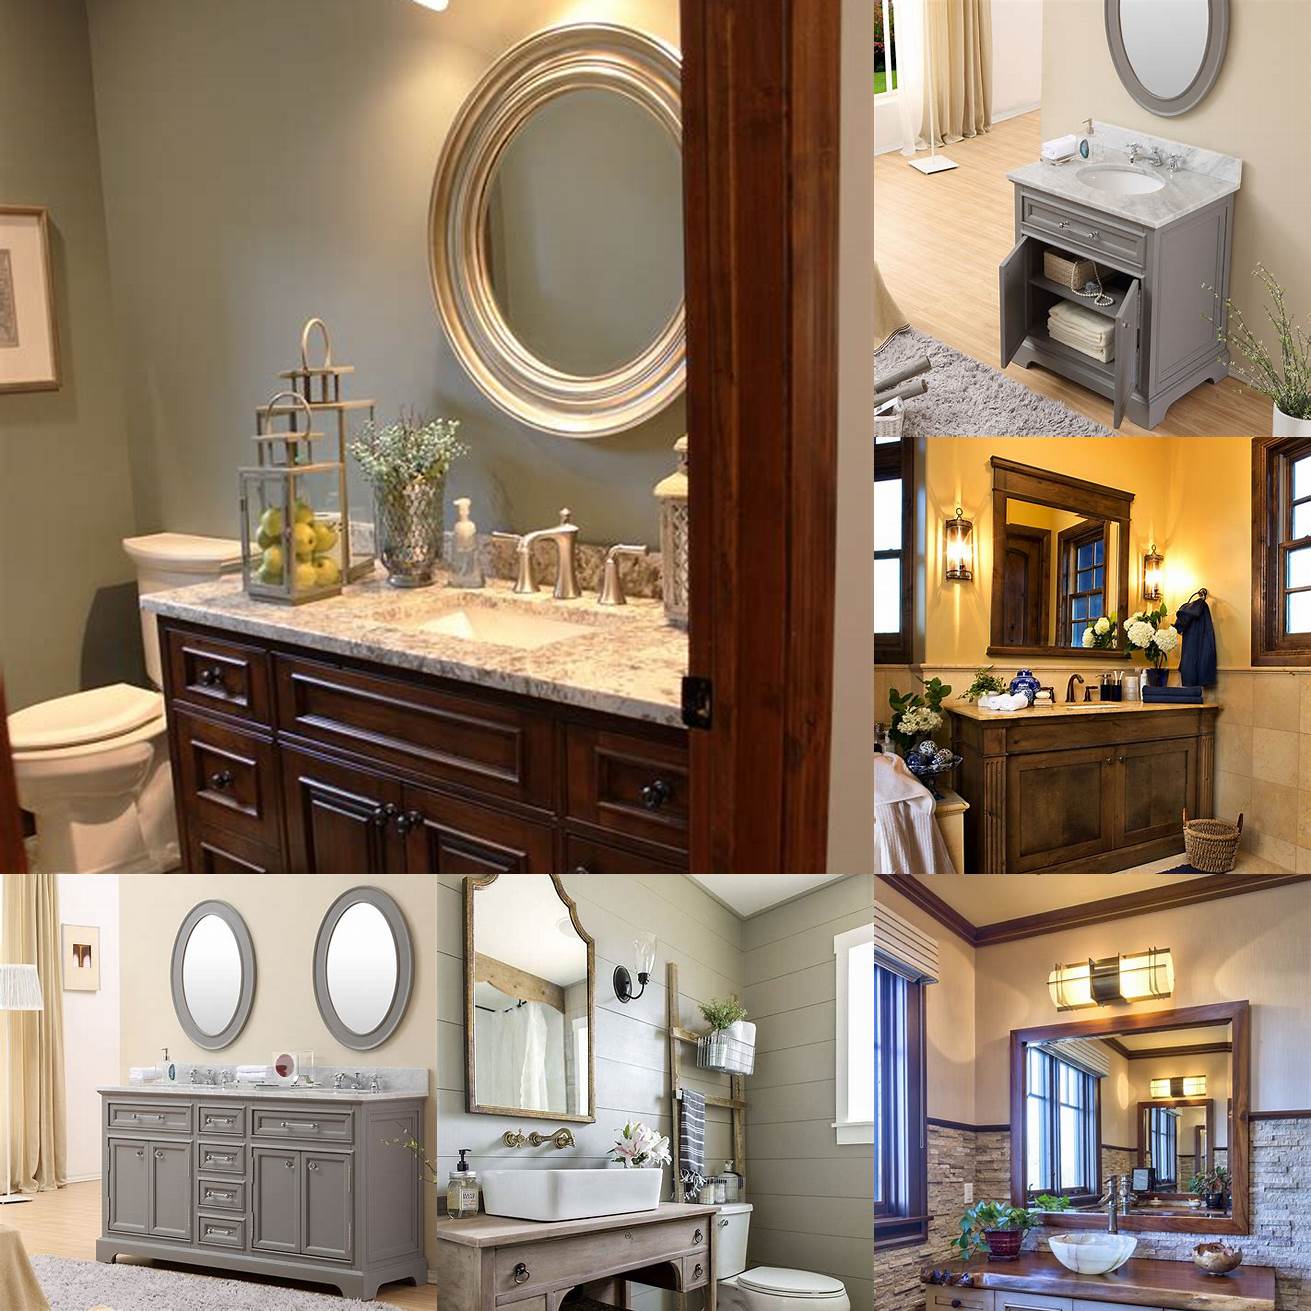 A traditional guest bathroom vanity with decorative elements and a classic finish